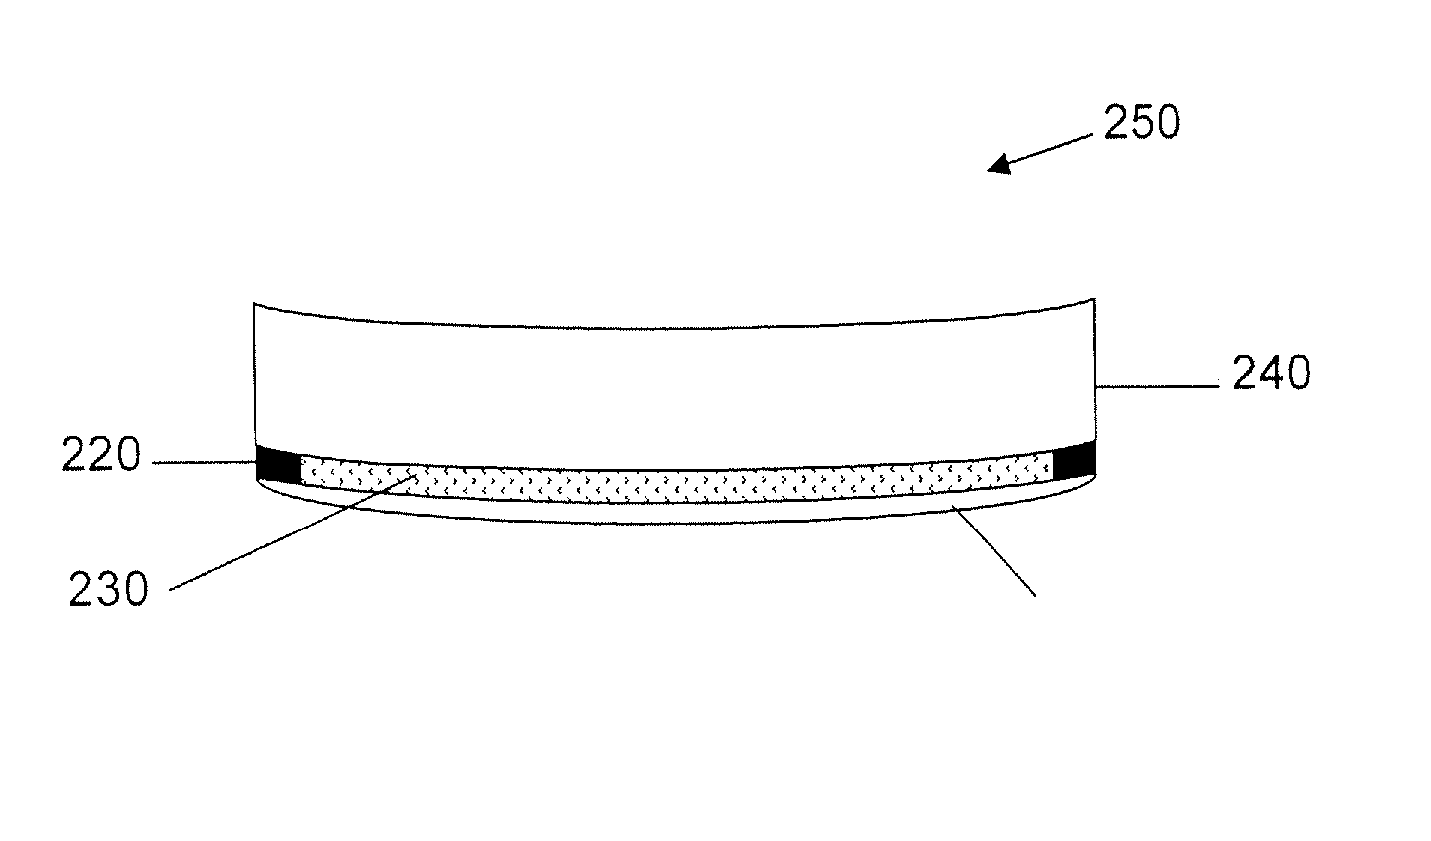 Materials and methods for producing lenses